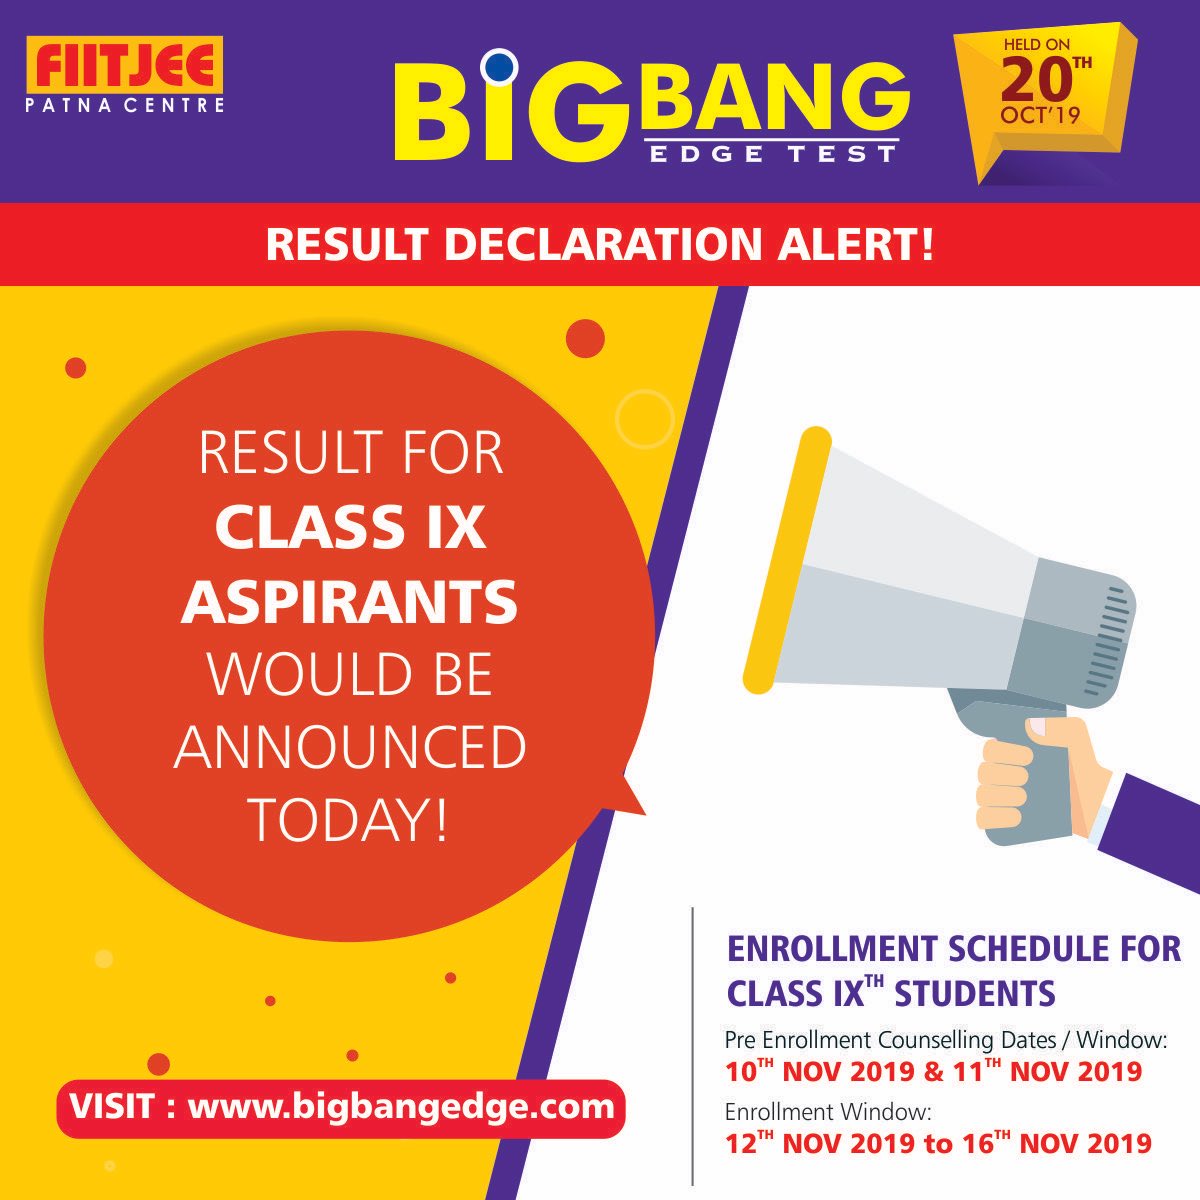 -Big Bang Edge Test 2019 | Update -
Result for class 9th aspirants is NOW LIVE at bigbangedge.com. Also, please note the dates of Pre Enrollment Counselling and Enrollment window!!!
#BBET2019 #Class9th #Result #FIITJEEPatna